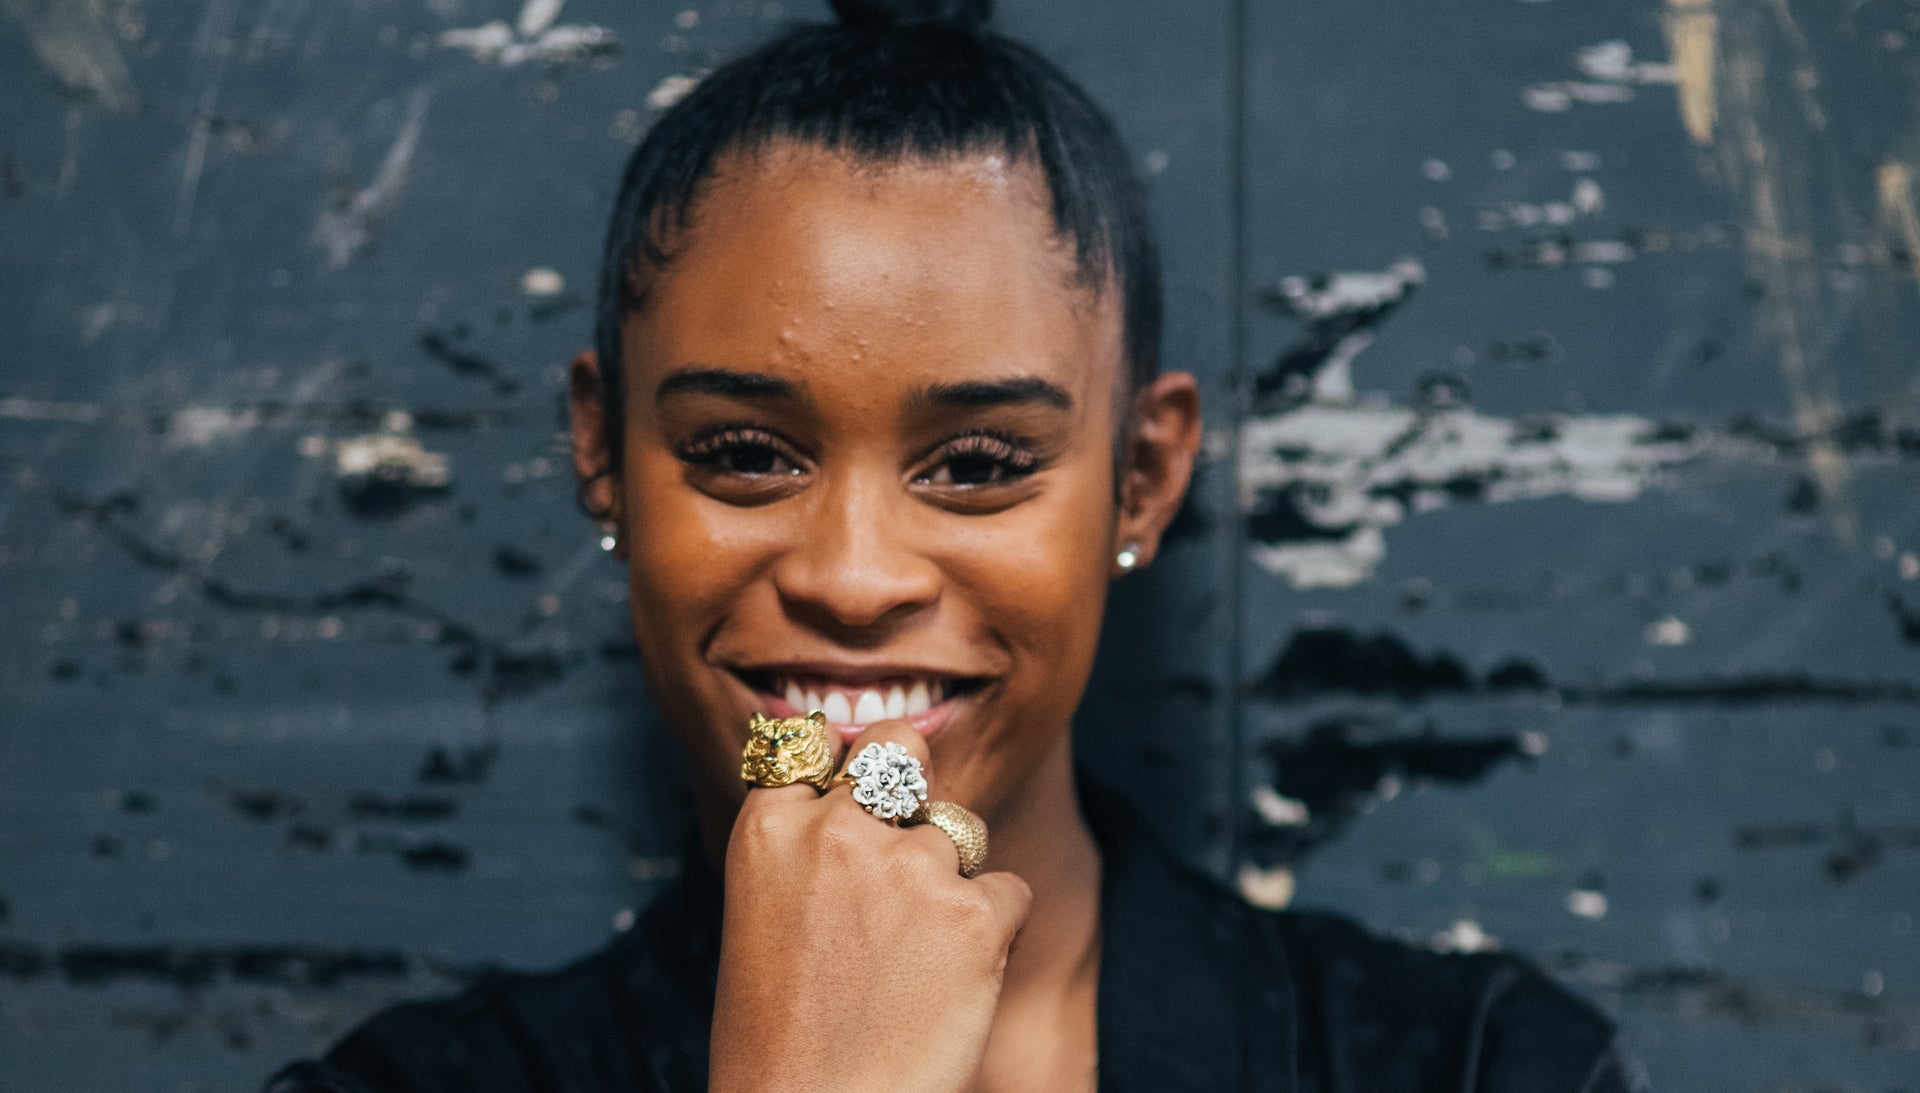 Meet Paris Hines, The Woman Behind Ari Lennox And Other Artists You Love